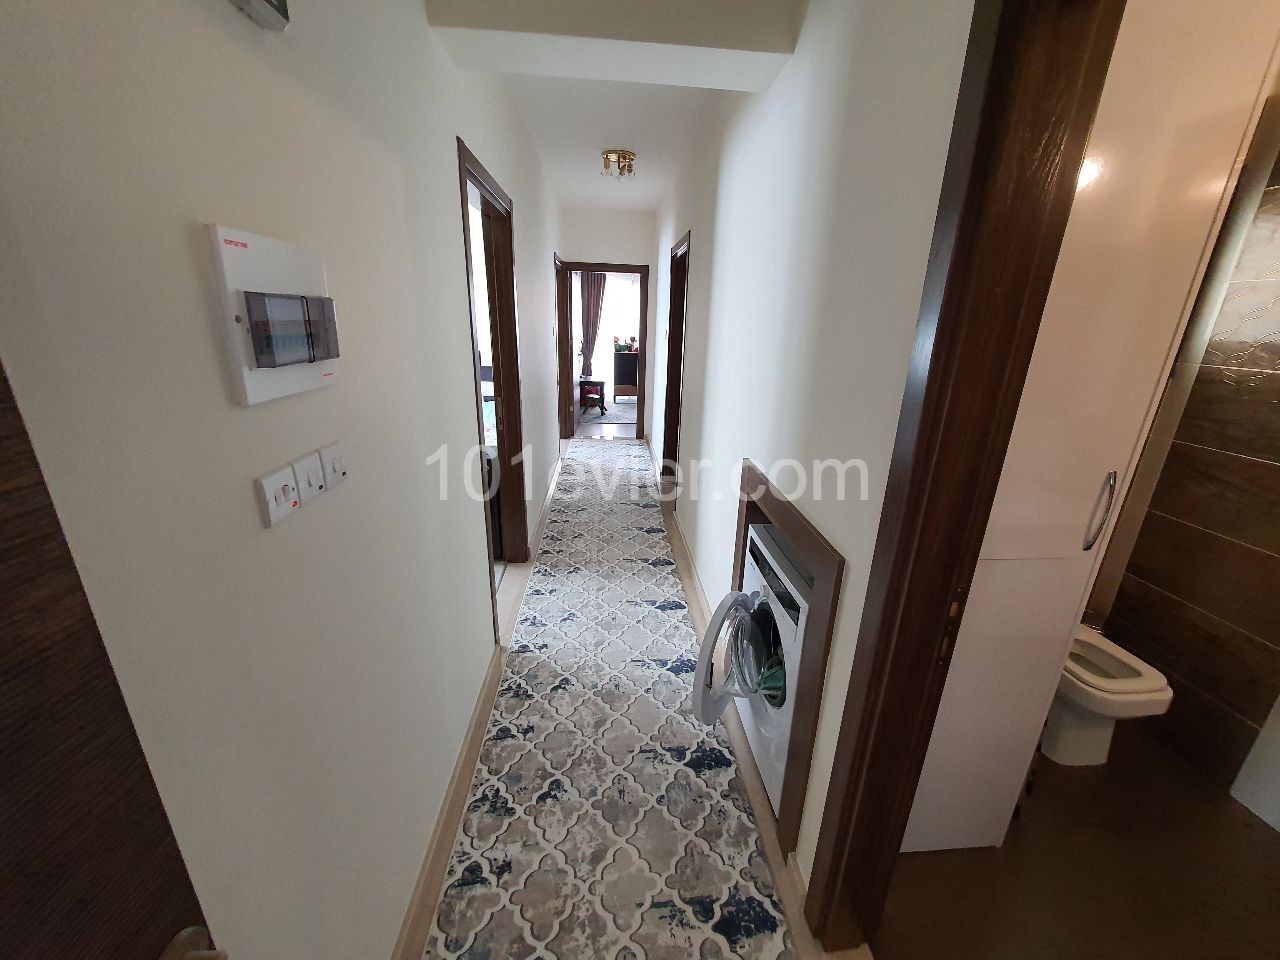 YOU CAN HAVE 61.000 STG IN OUR LUXURY 3 + 1 APARTMENT THAT DOES NOT REQUIRE ANY EXPENSES, WHICH IS SUITABLE FOR EVERY FAMILY WITH ITS LOCATION AND SIZE WHERE YOU WILL LIVE PEACEFULLY IN NICOSIA MITRELI ** 